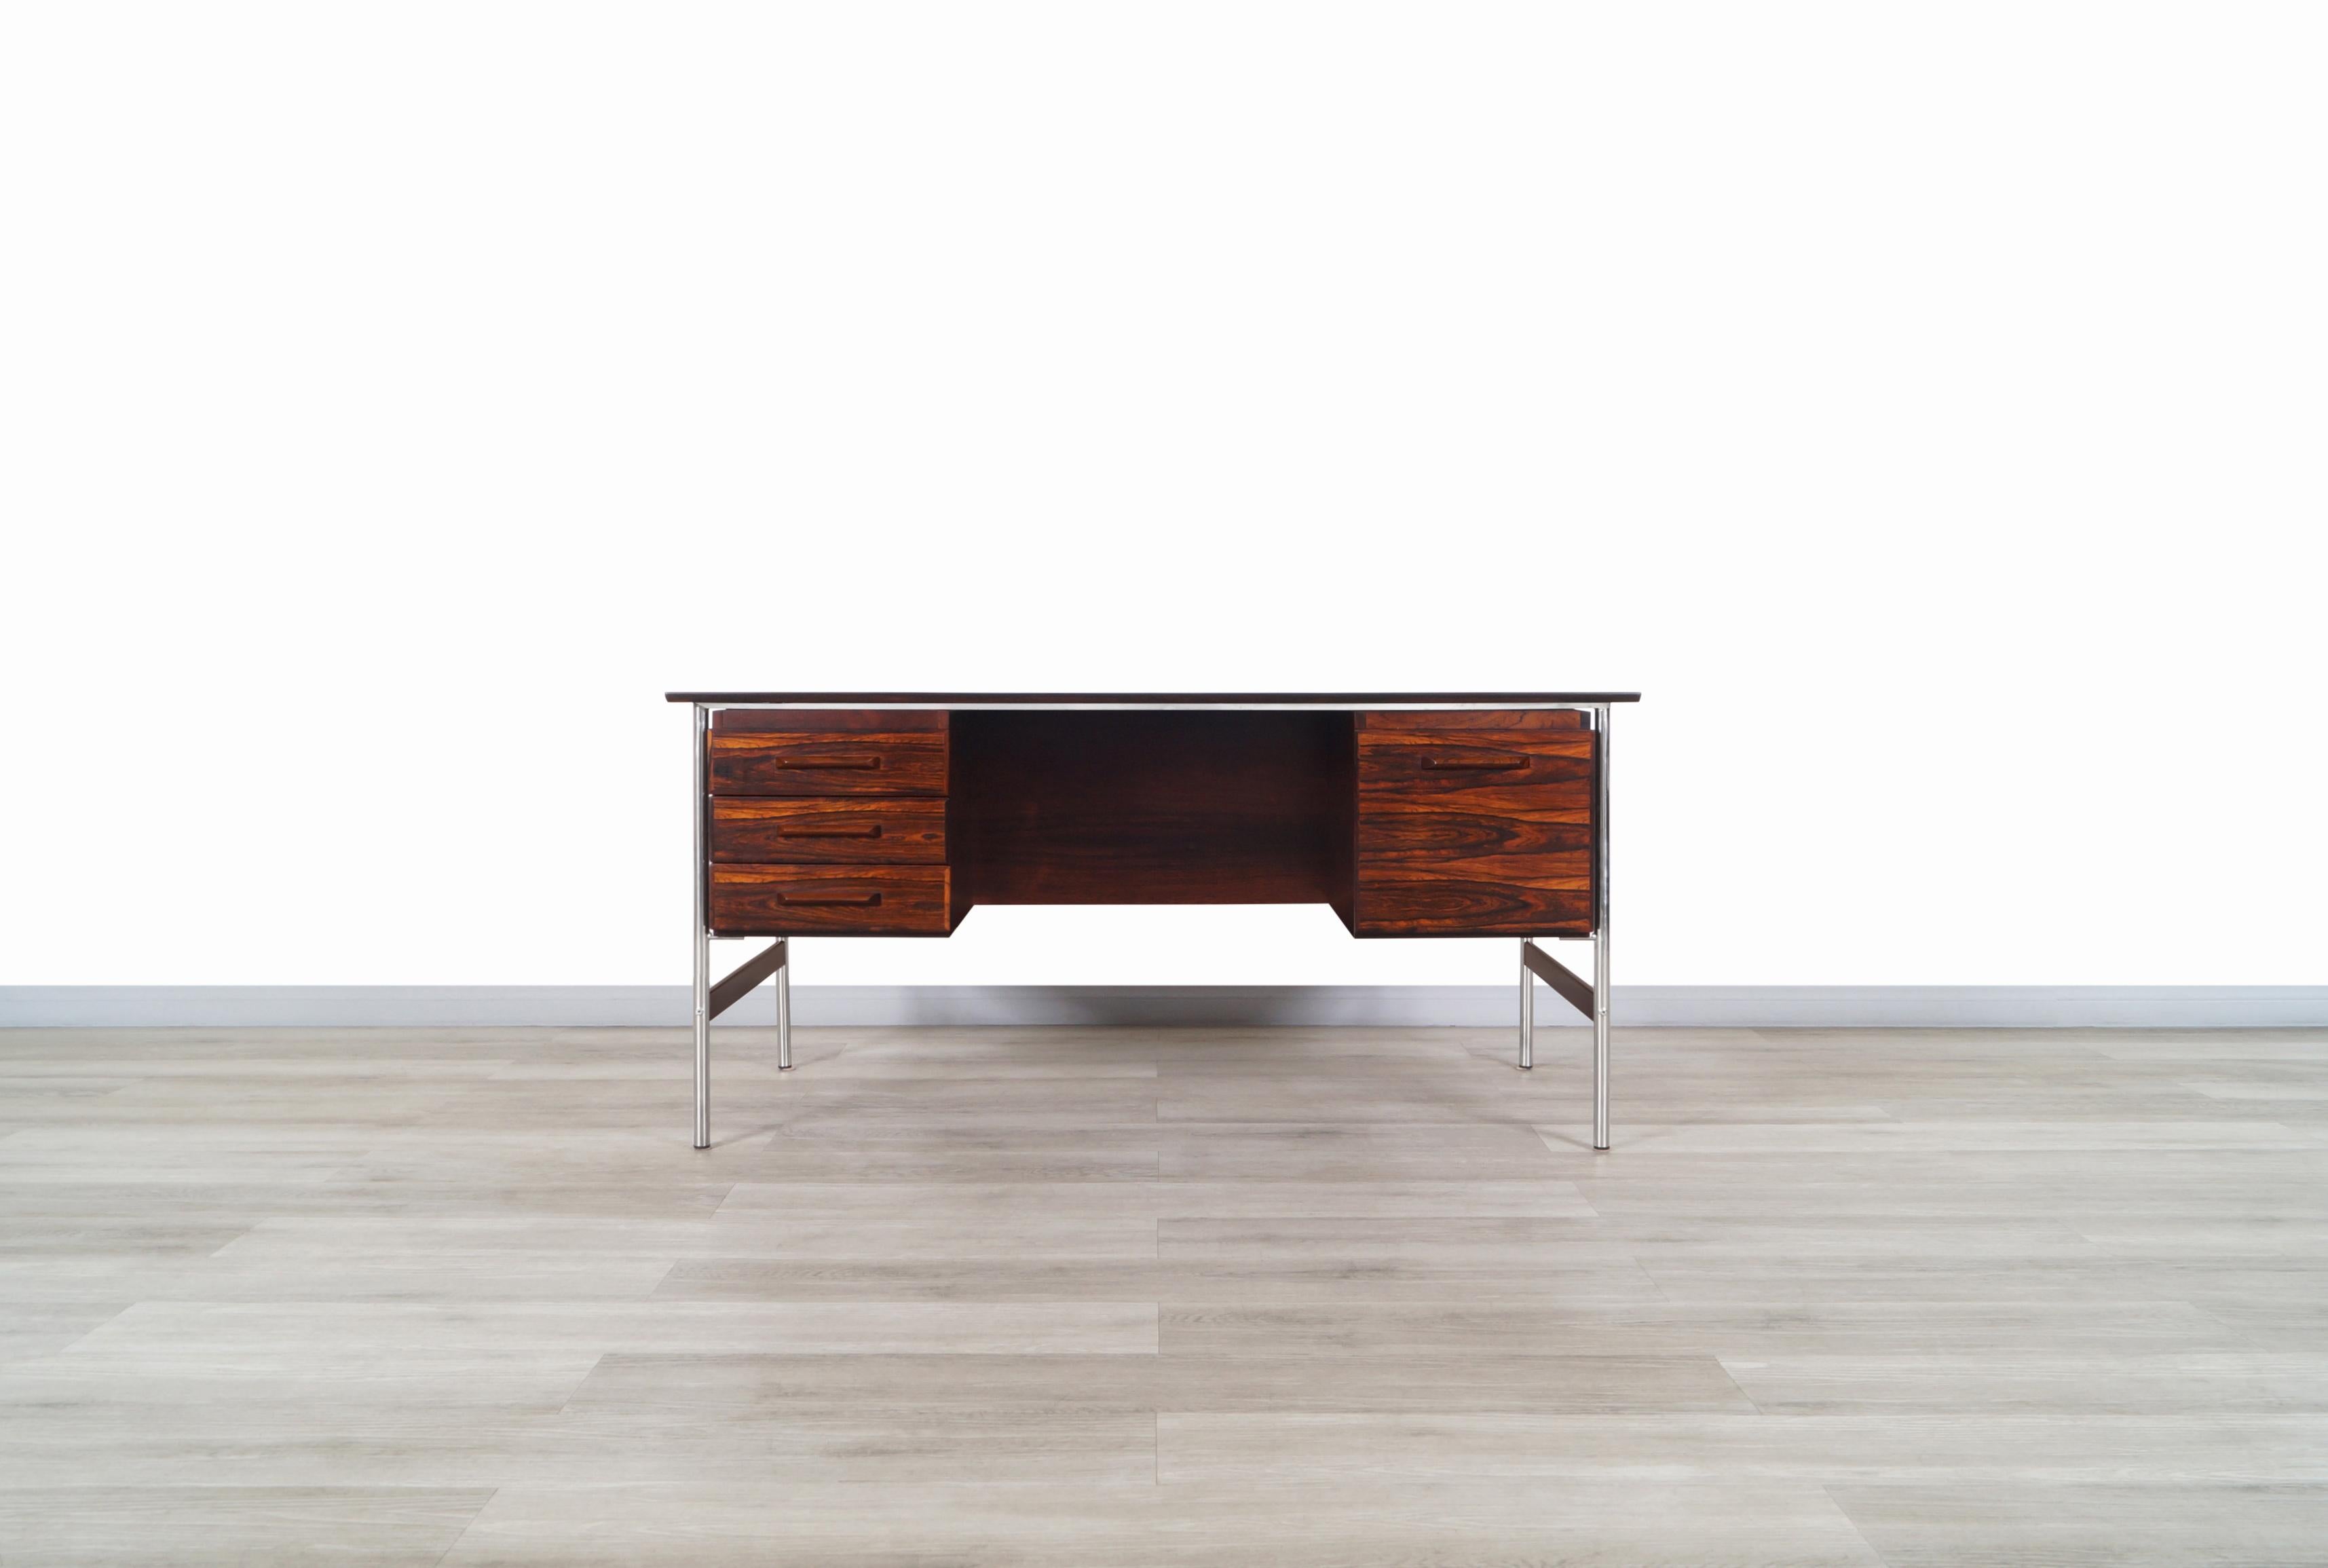 Amazing Norwegian modern rosewood desk attributed to Dokka Møbler and manufactured in Norway, circa 1960s. This desk has an executive and functional design. The desk is made of Brazilian rosewood, giving it a fascinating contrast of colors thanks to